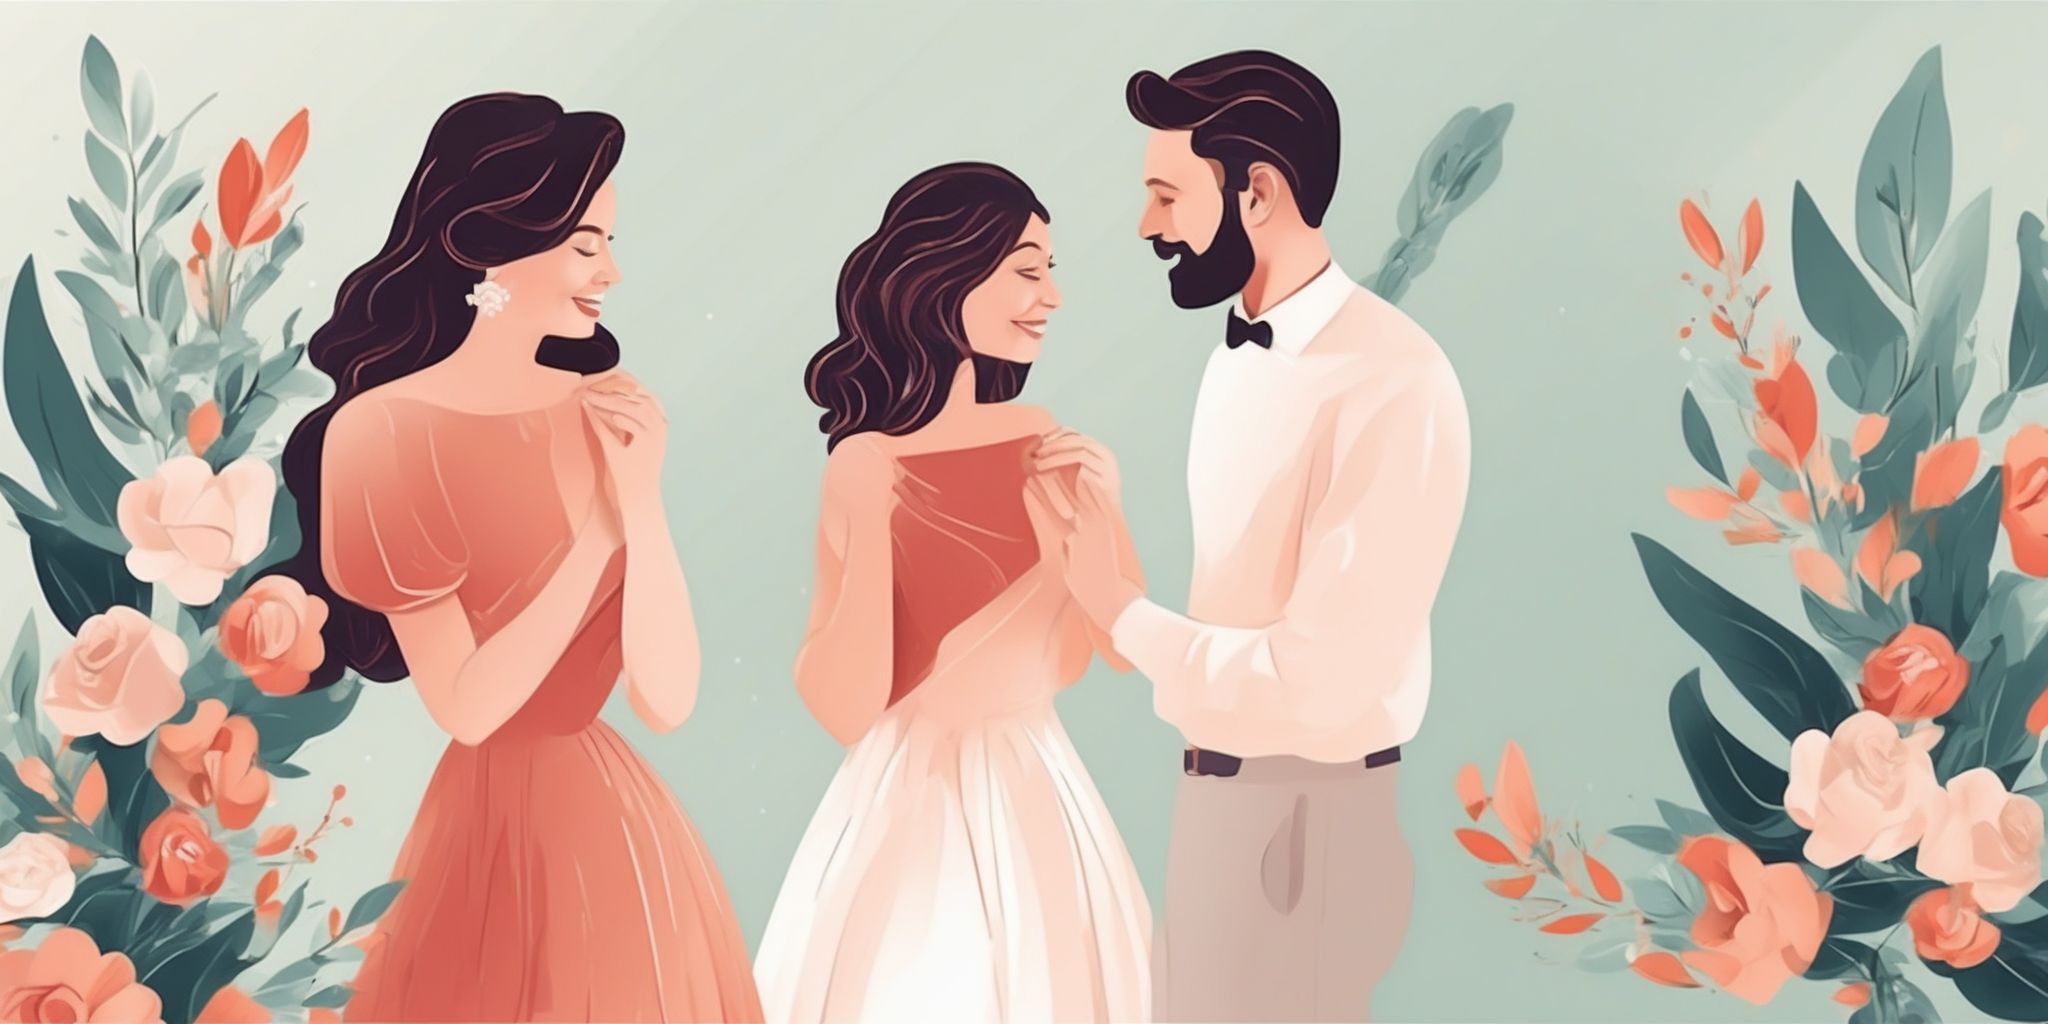 Engagement in illustration style with gradients and white background